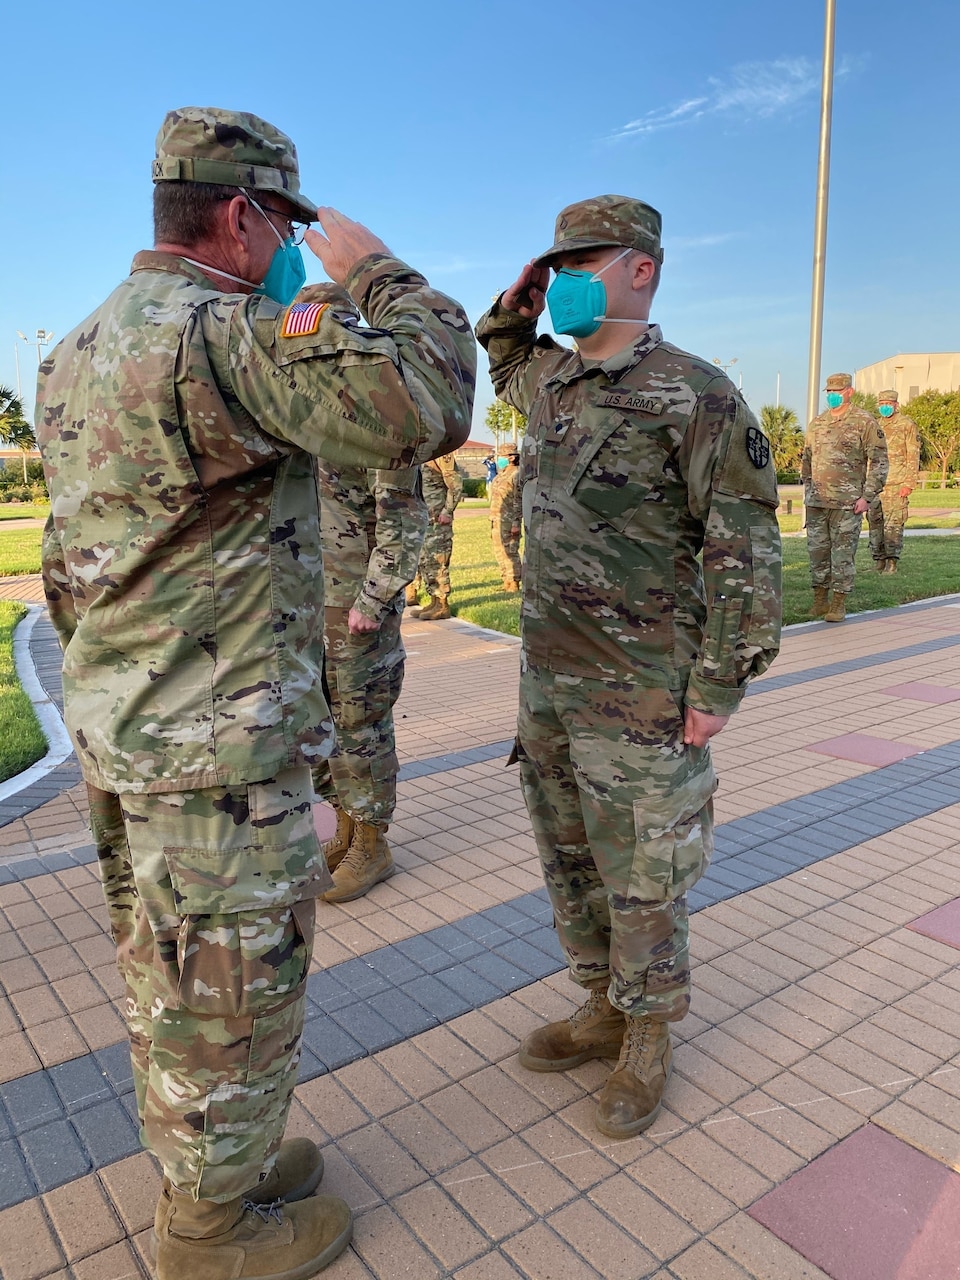 A soldier being saluted by another soldier.